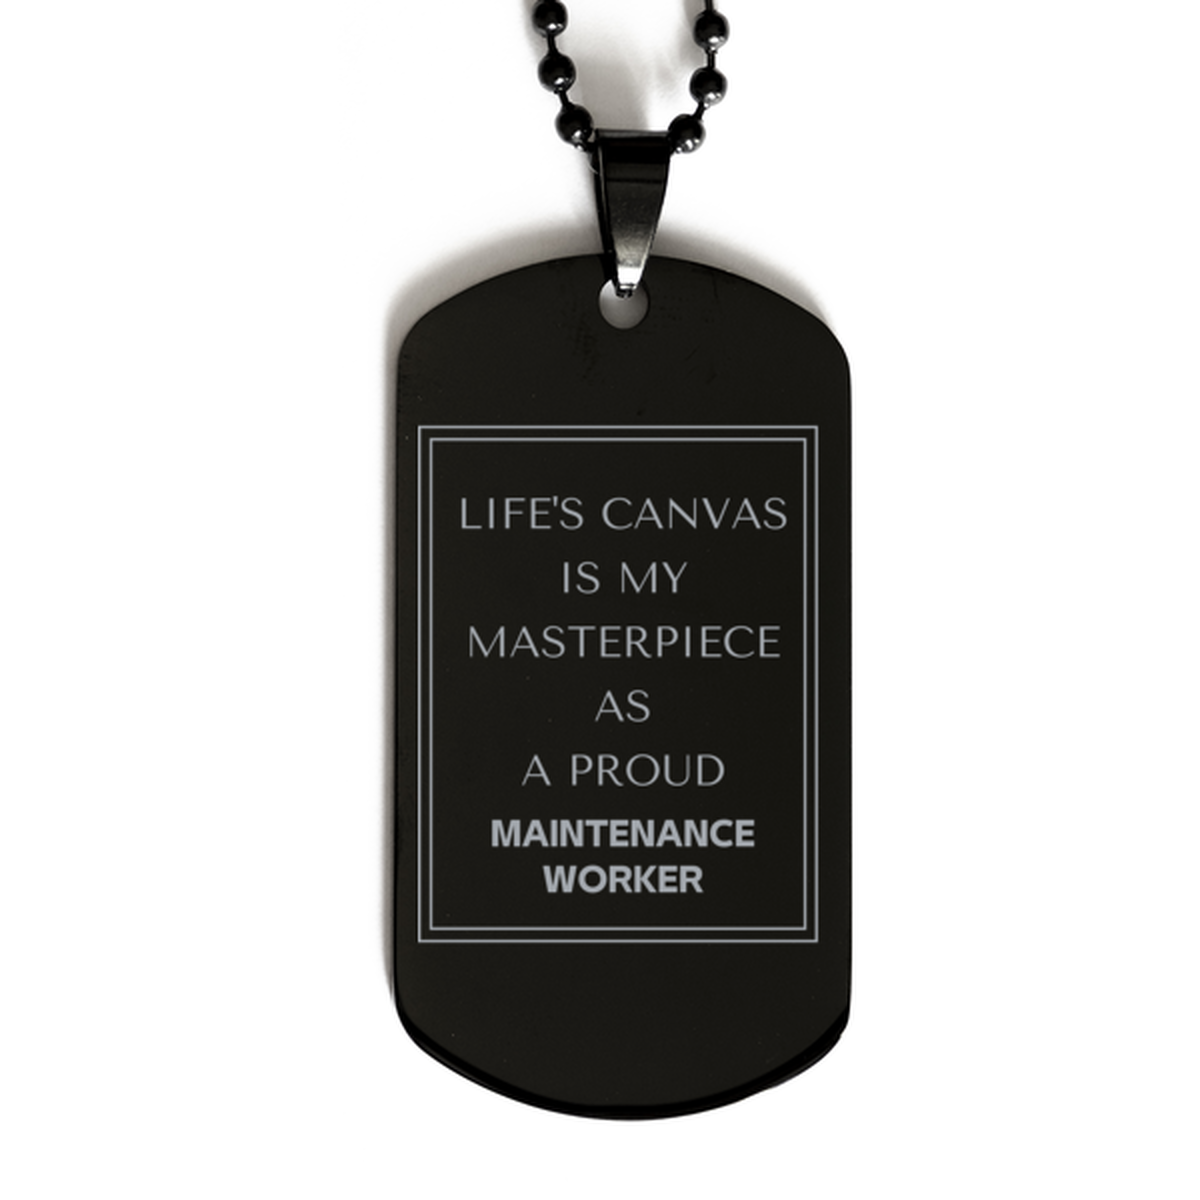 Proud Maintenance Worker Gifts, Life's canvas is my masterpiece, Epic Birthday Christmas Unique Black Dog Tag For Maintenance Worker, Coworkers, Men, Women, Friends